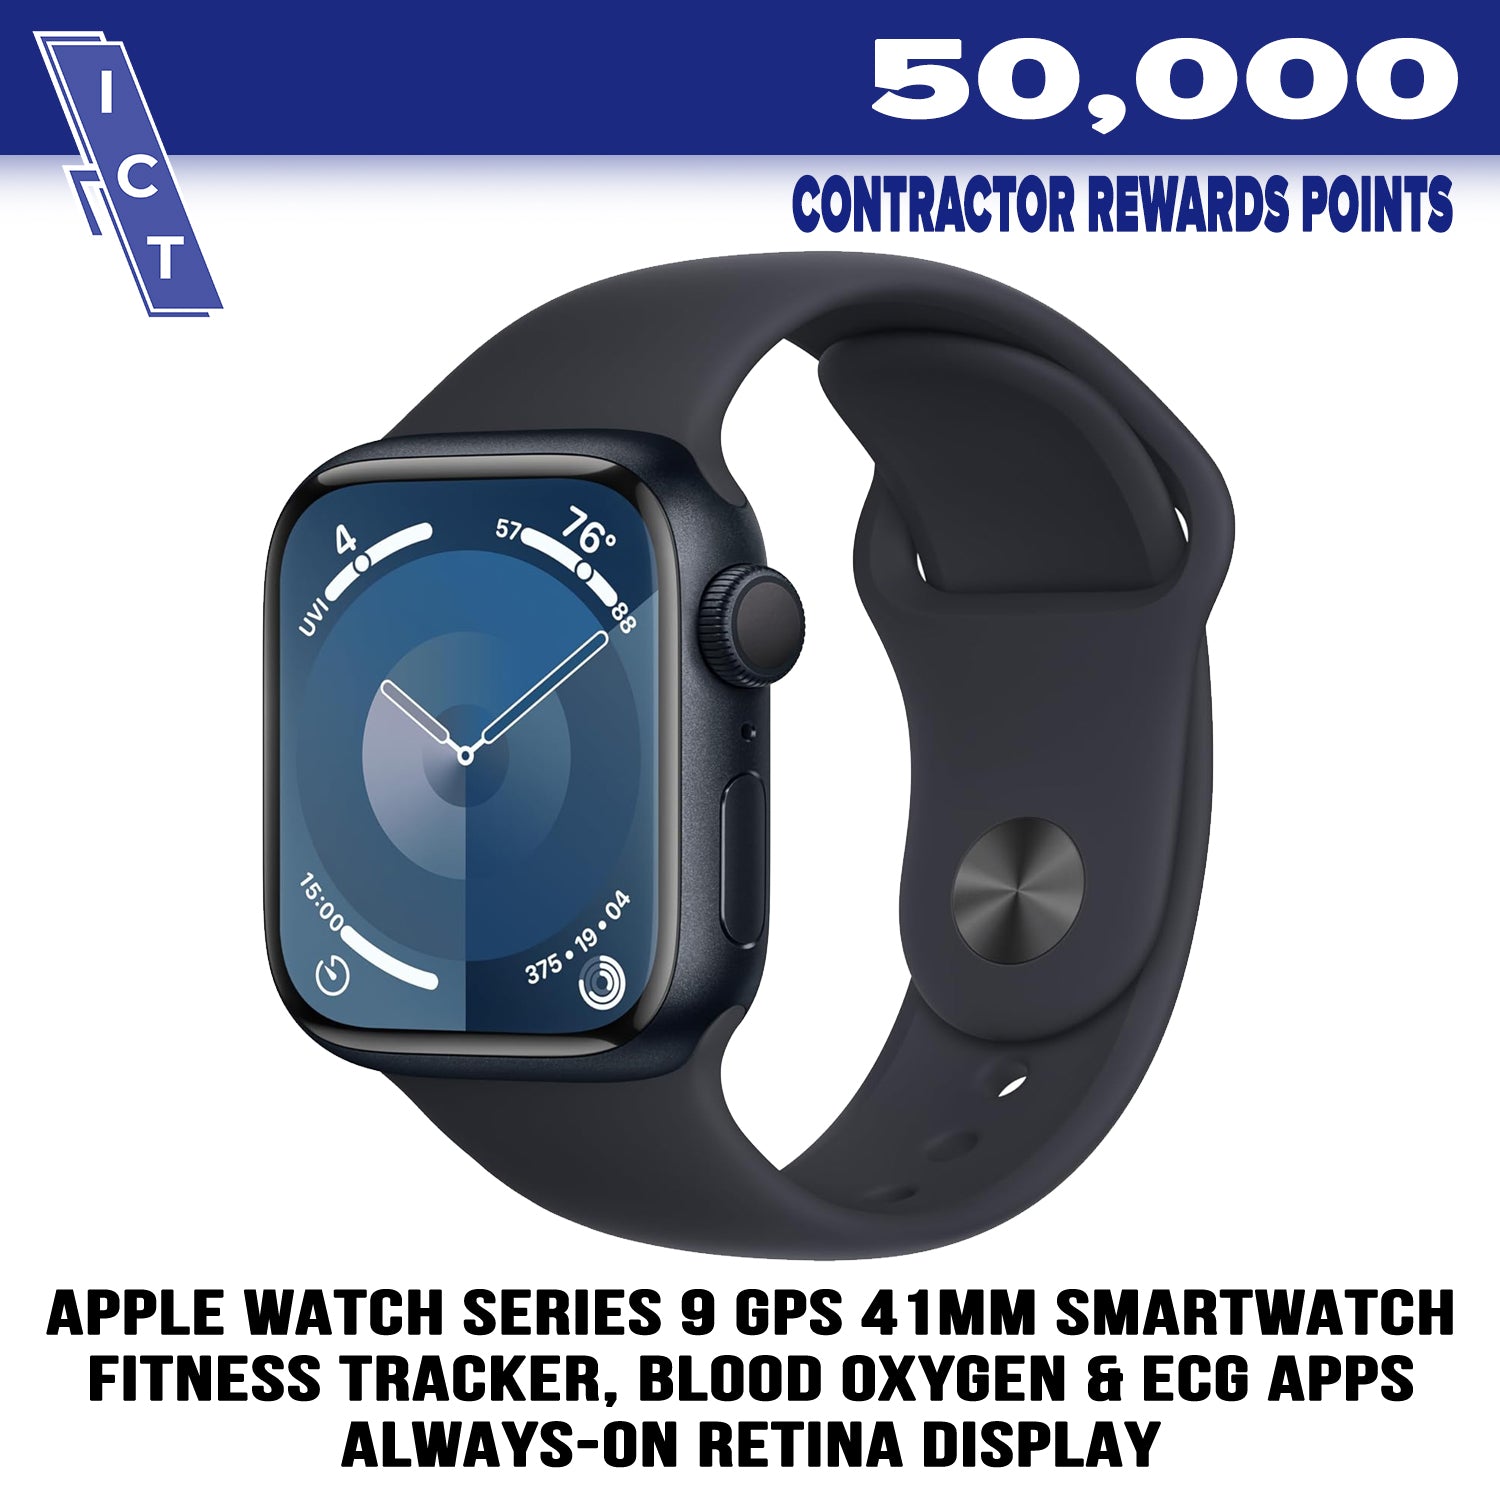 Apple Watch Series 9 prize for 50000 points